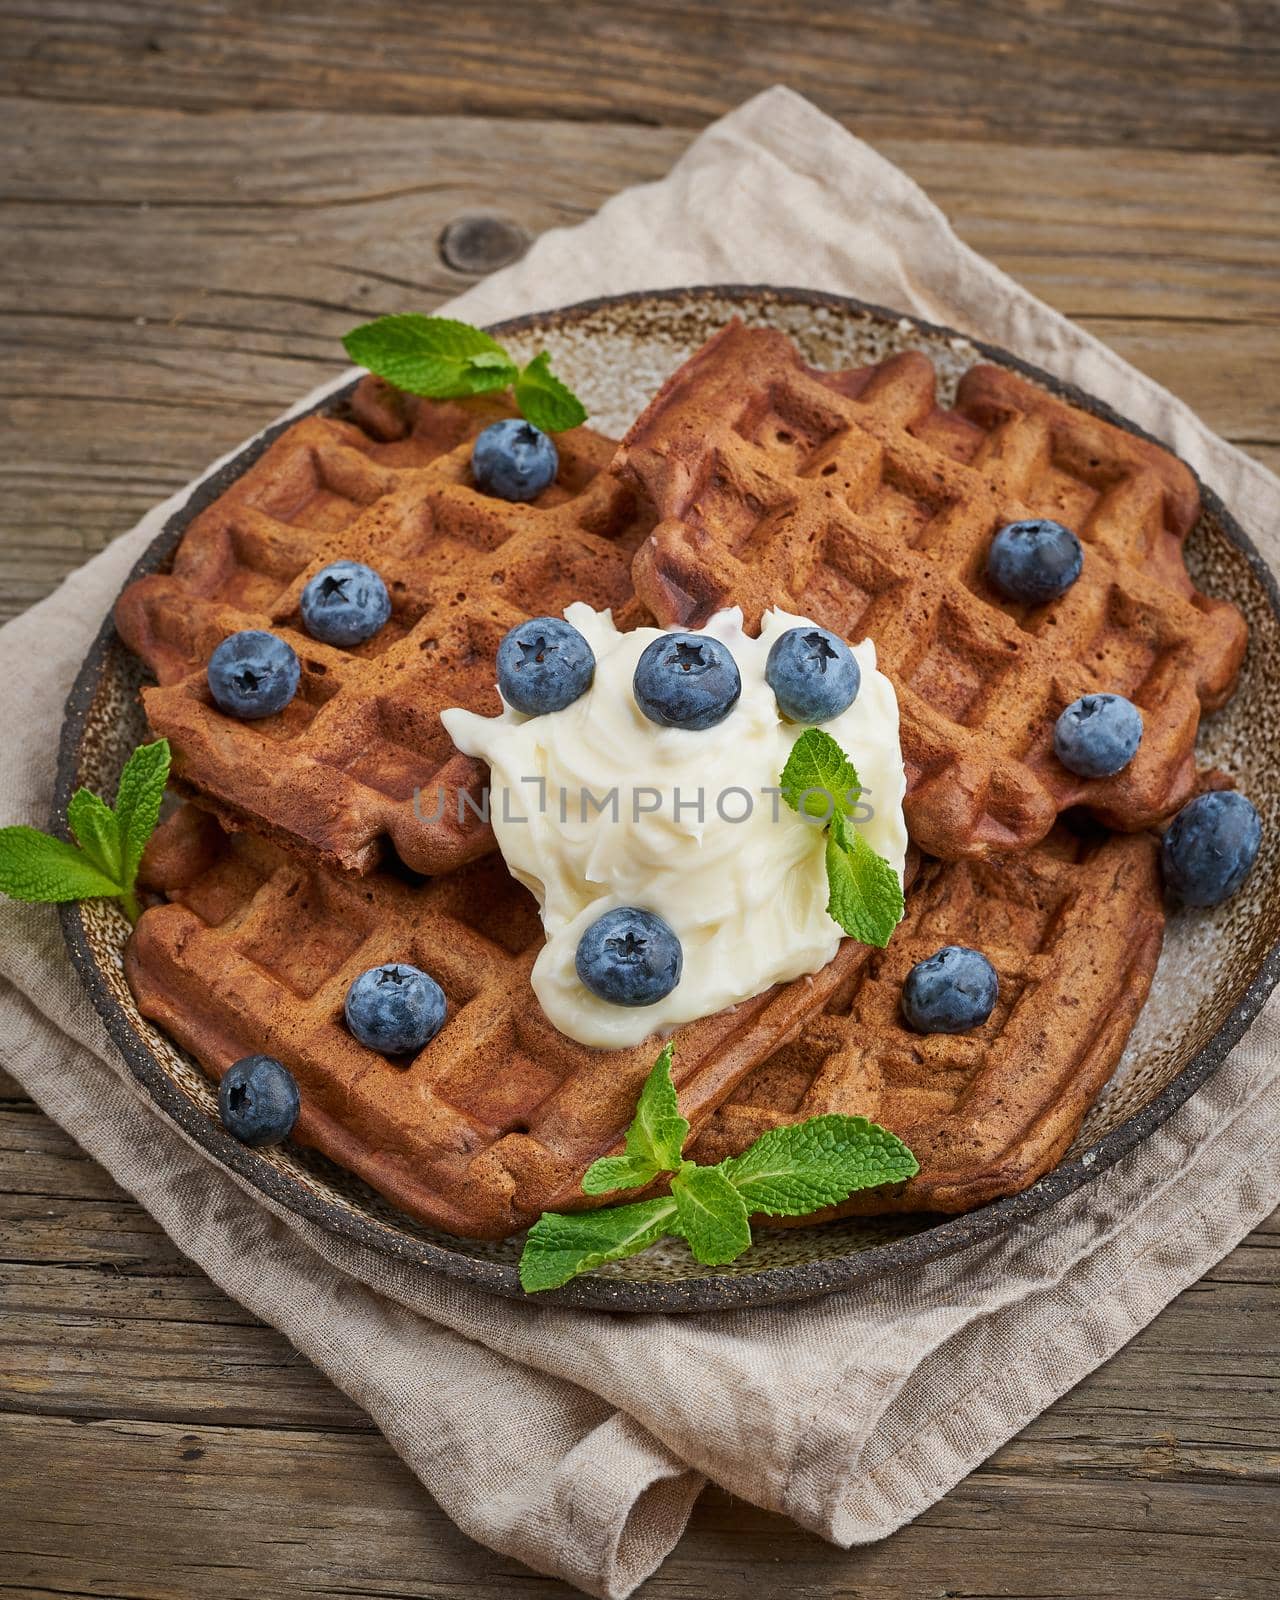 Chocolate banana waffles with blueberries, on dark wooden the old table. Side view, vertical